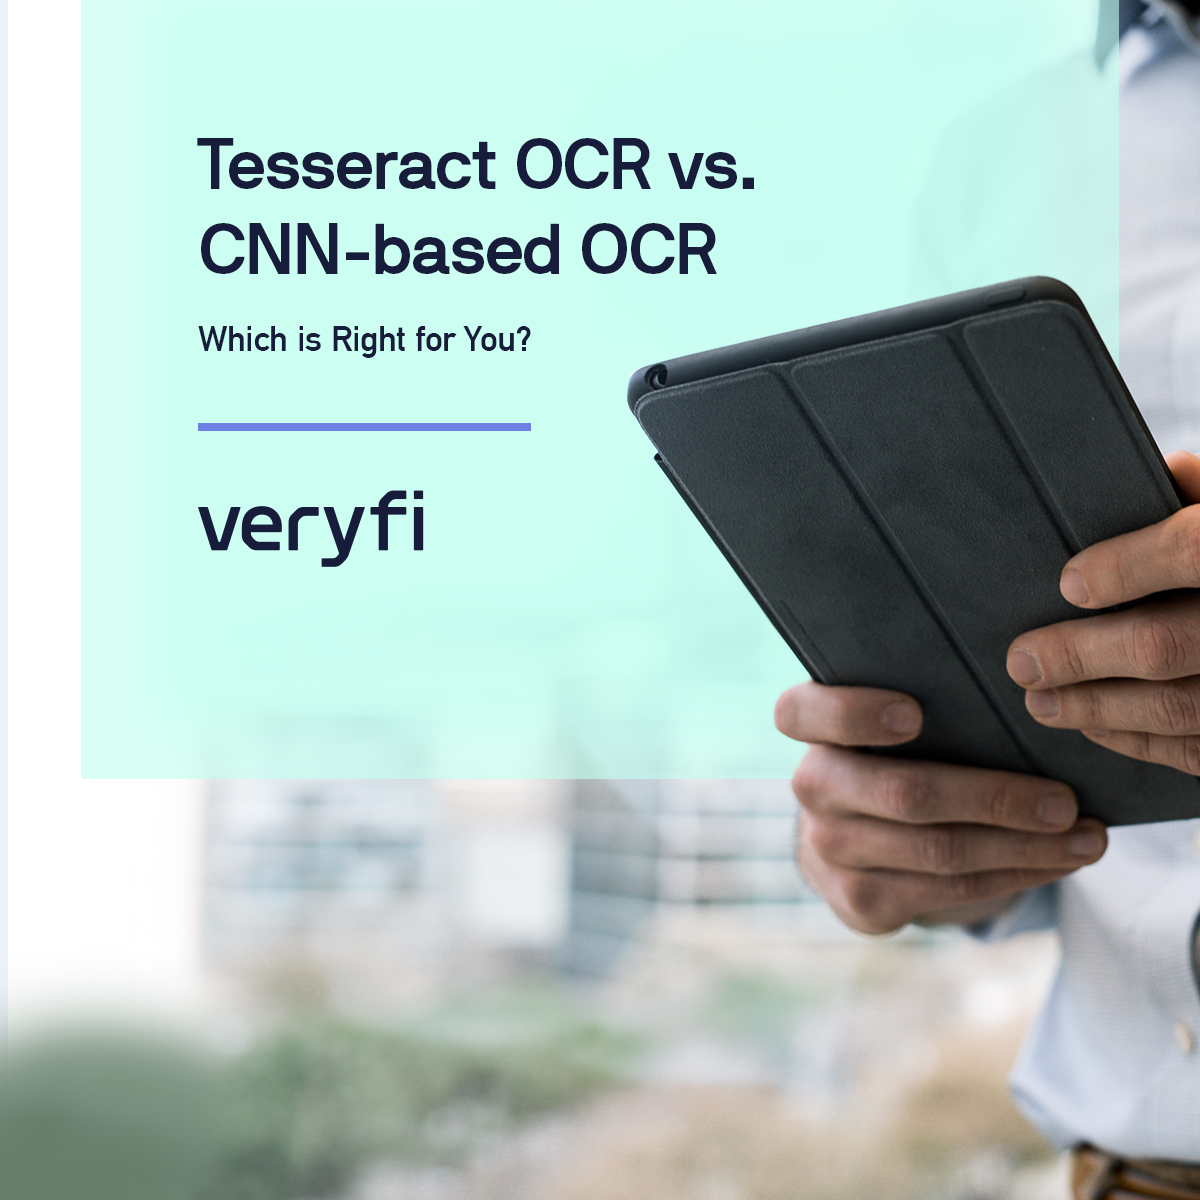 Tesseract OCR vs. CNN-based OCR: Which is Right for You?